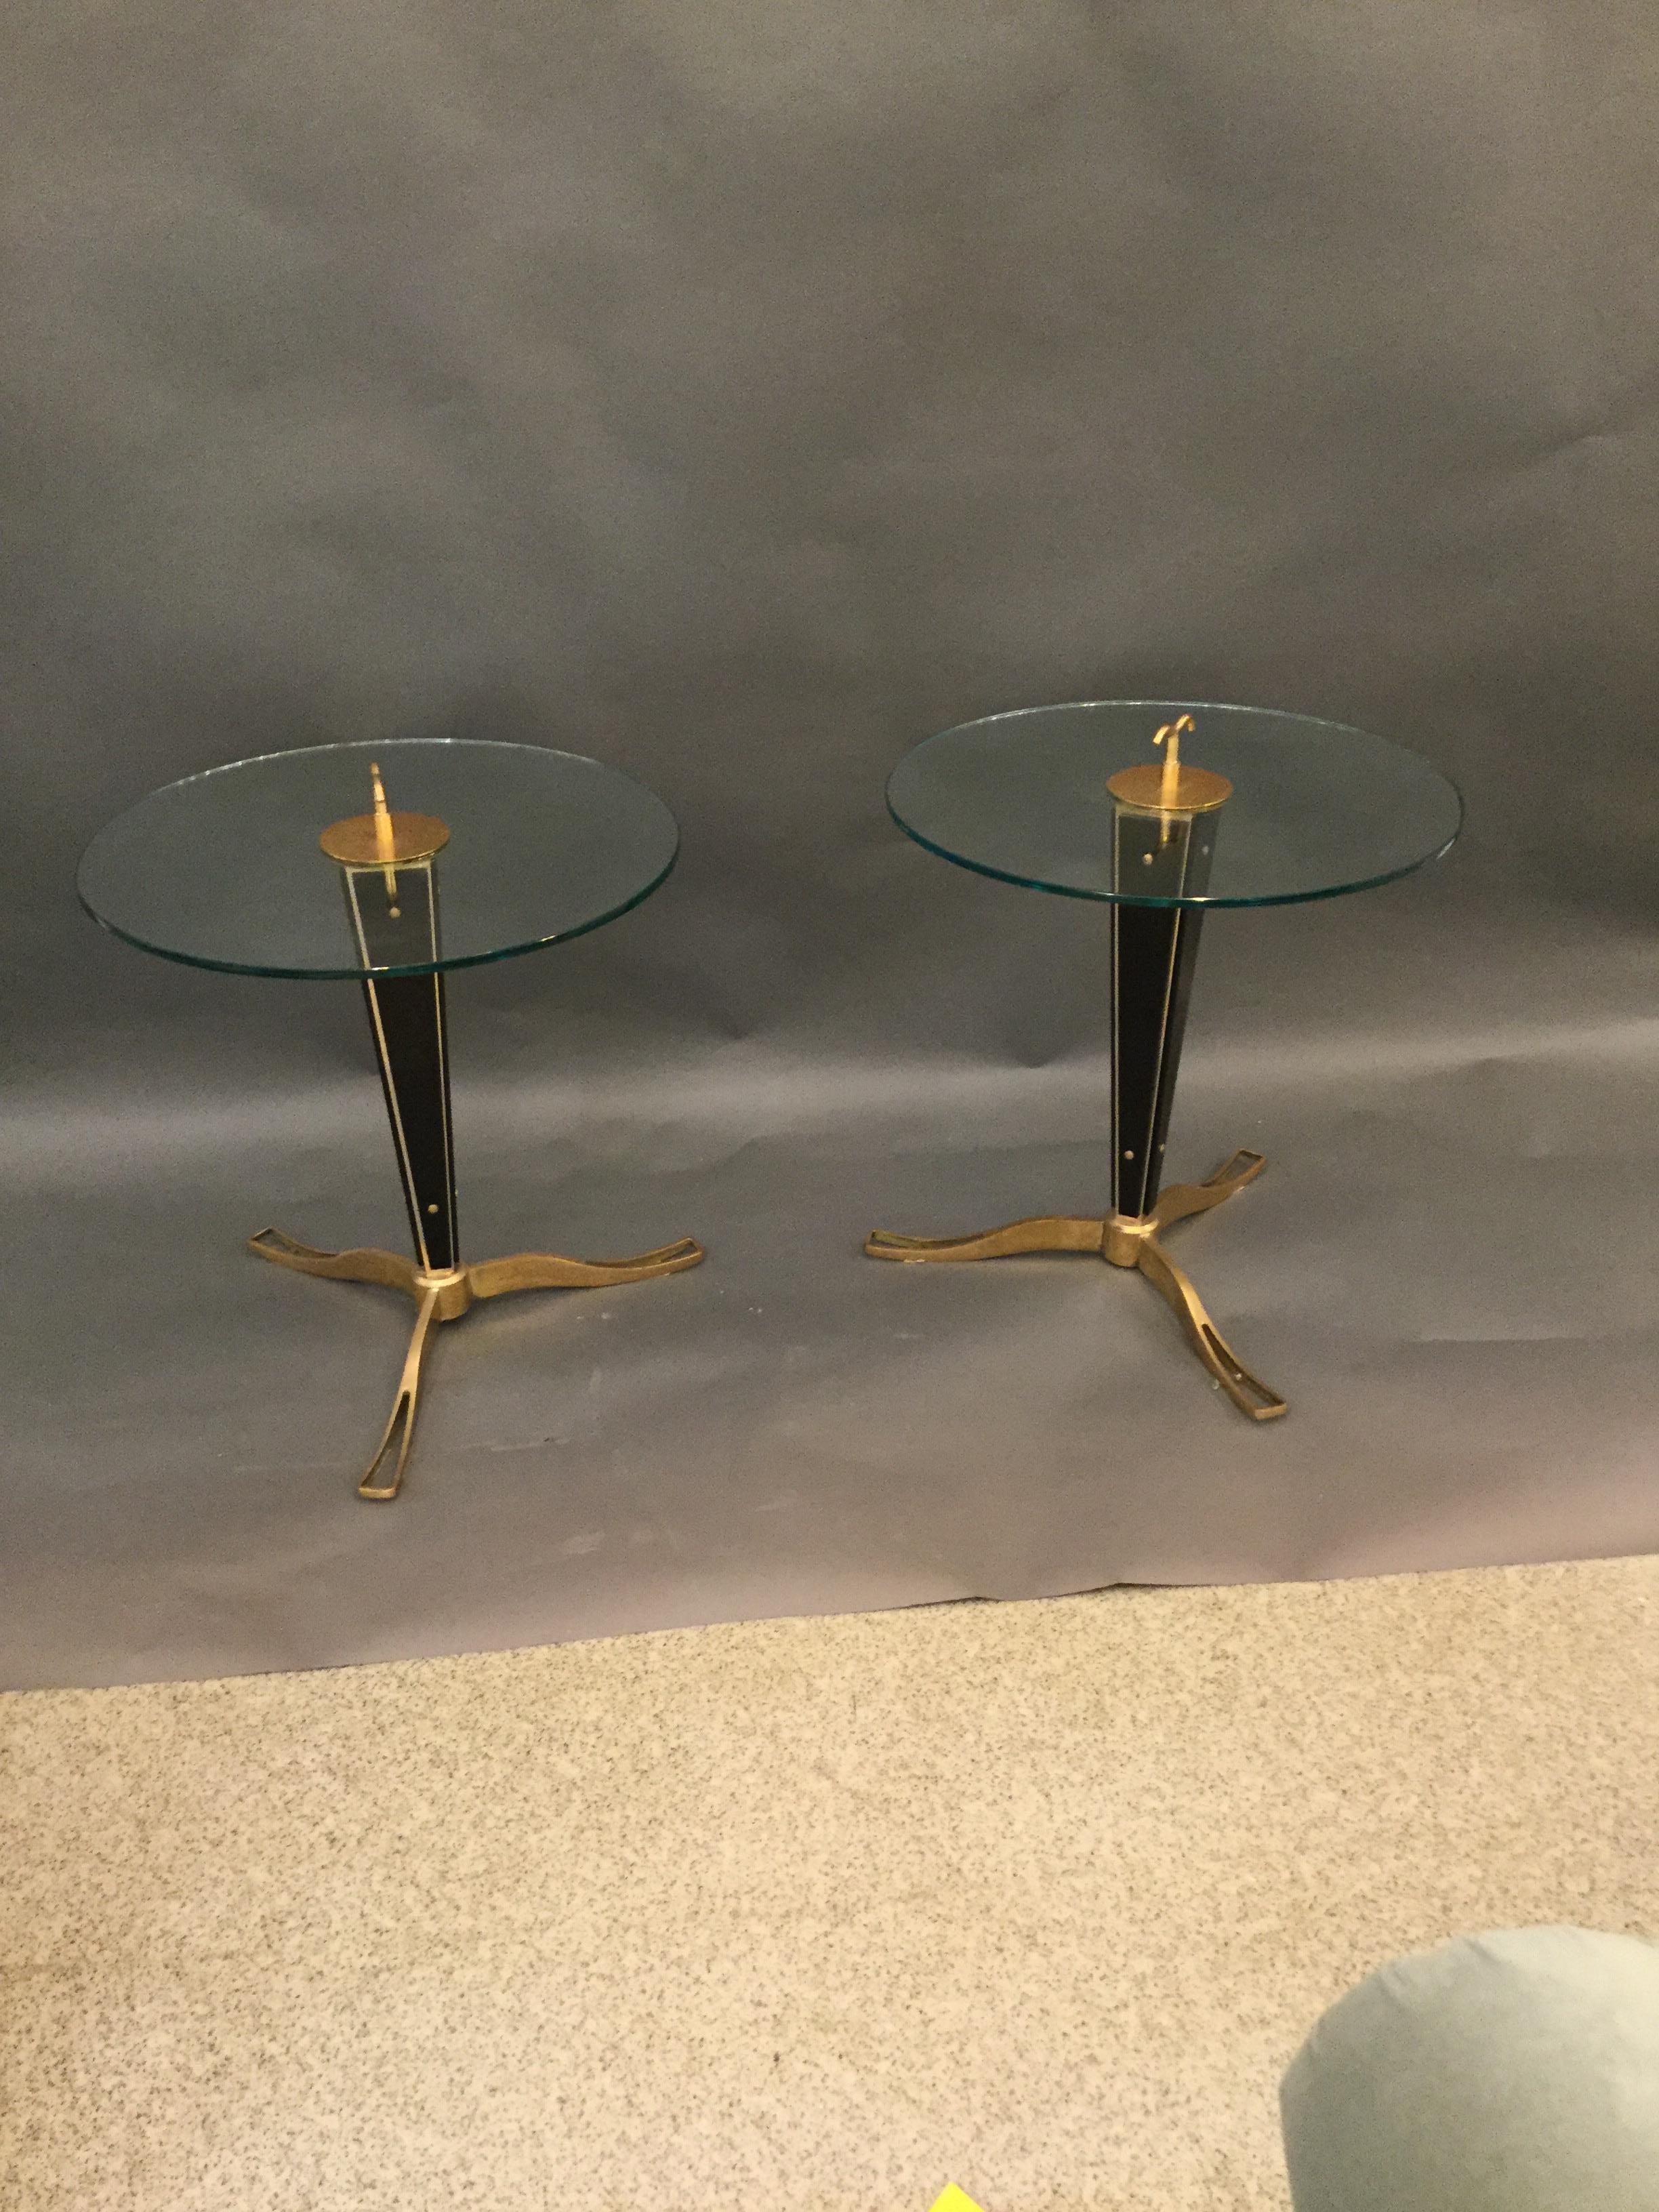 A stunning pair of Italian designed cocktail tables in bronze and glass on tripod legs with glass top the with glass on the base, 1960.